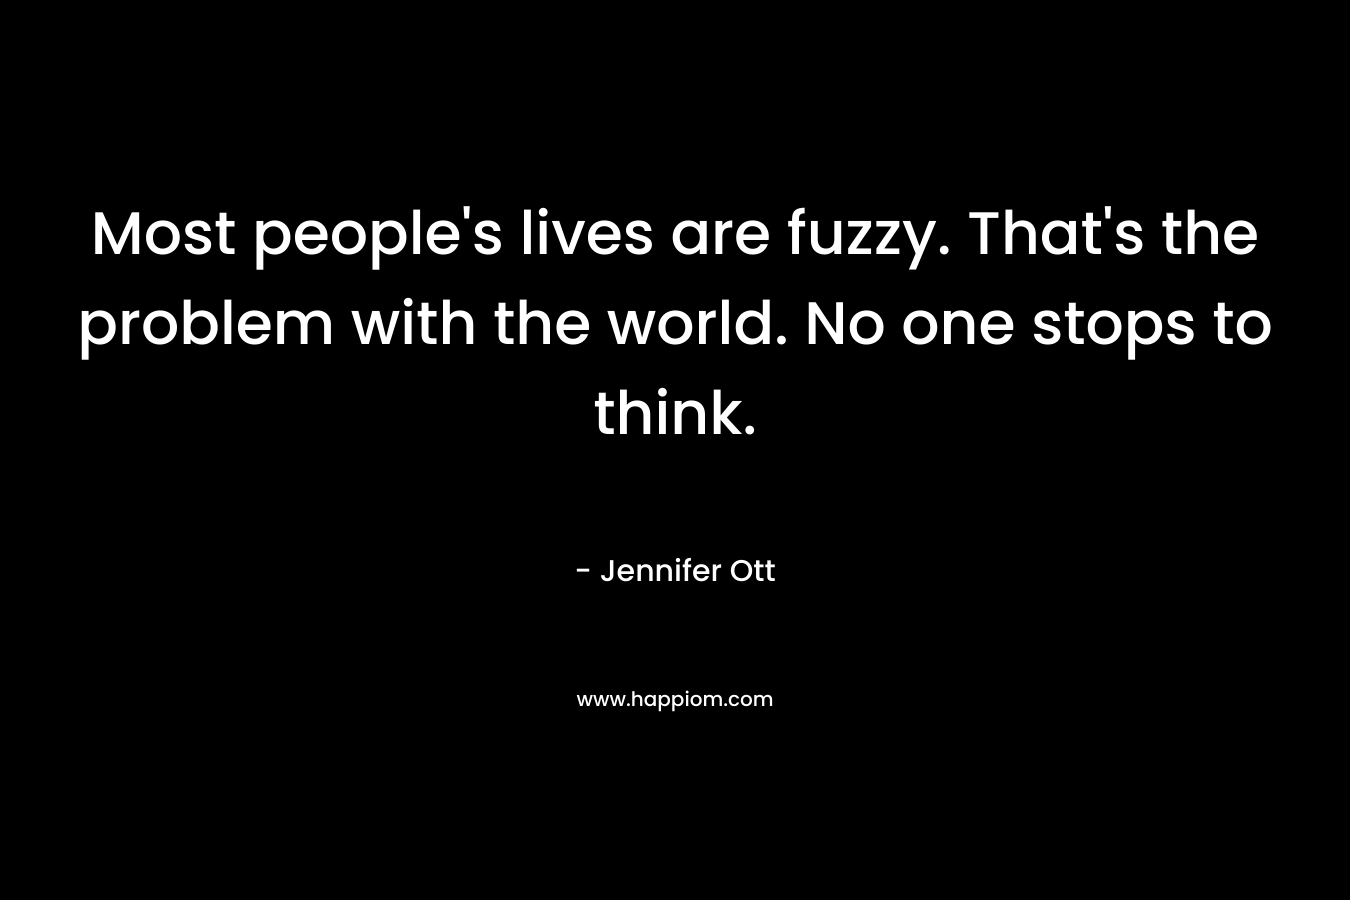 Most people’s lives are fuzzy. That’s the problem with the world. No one stops to think. – Jennifer Ott